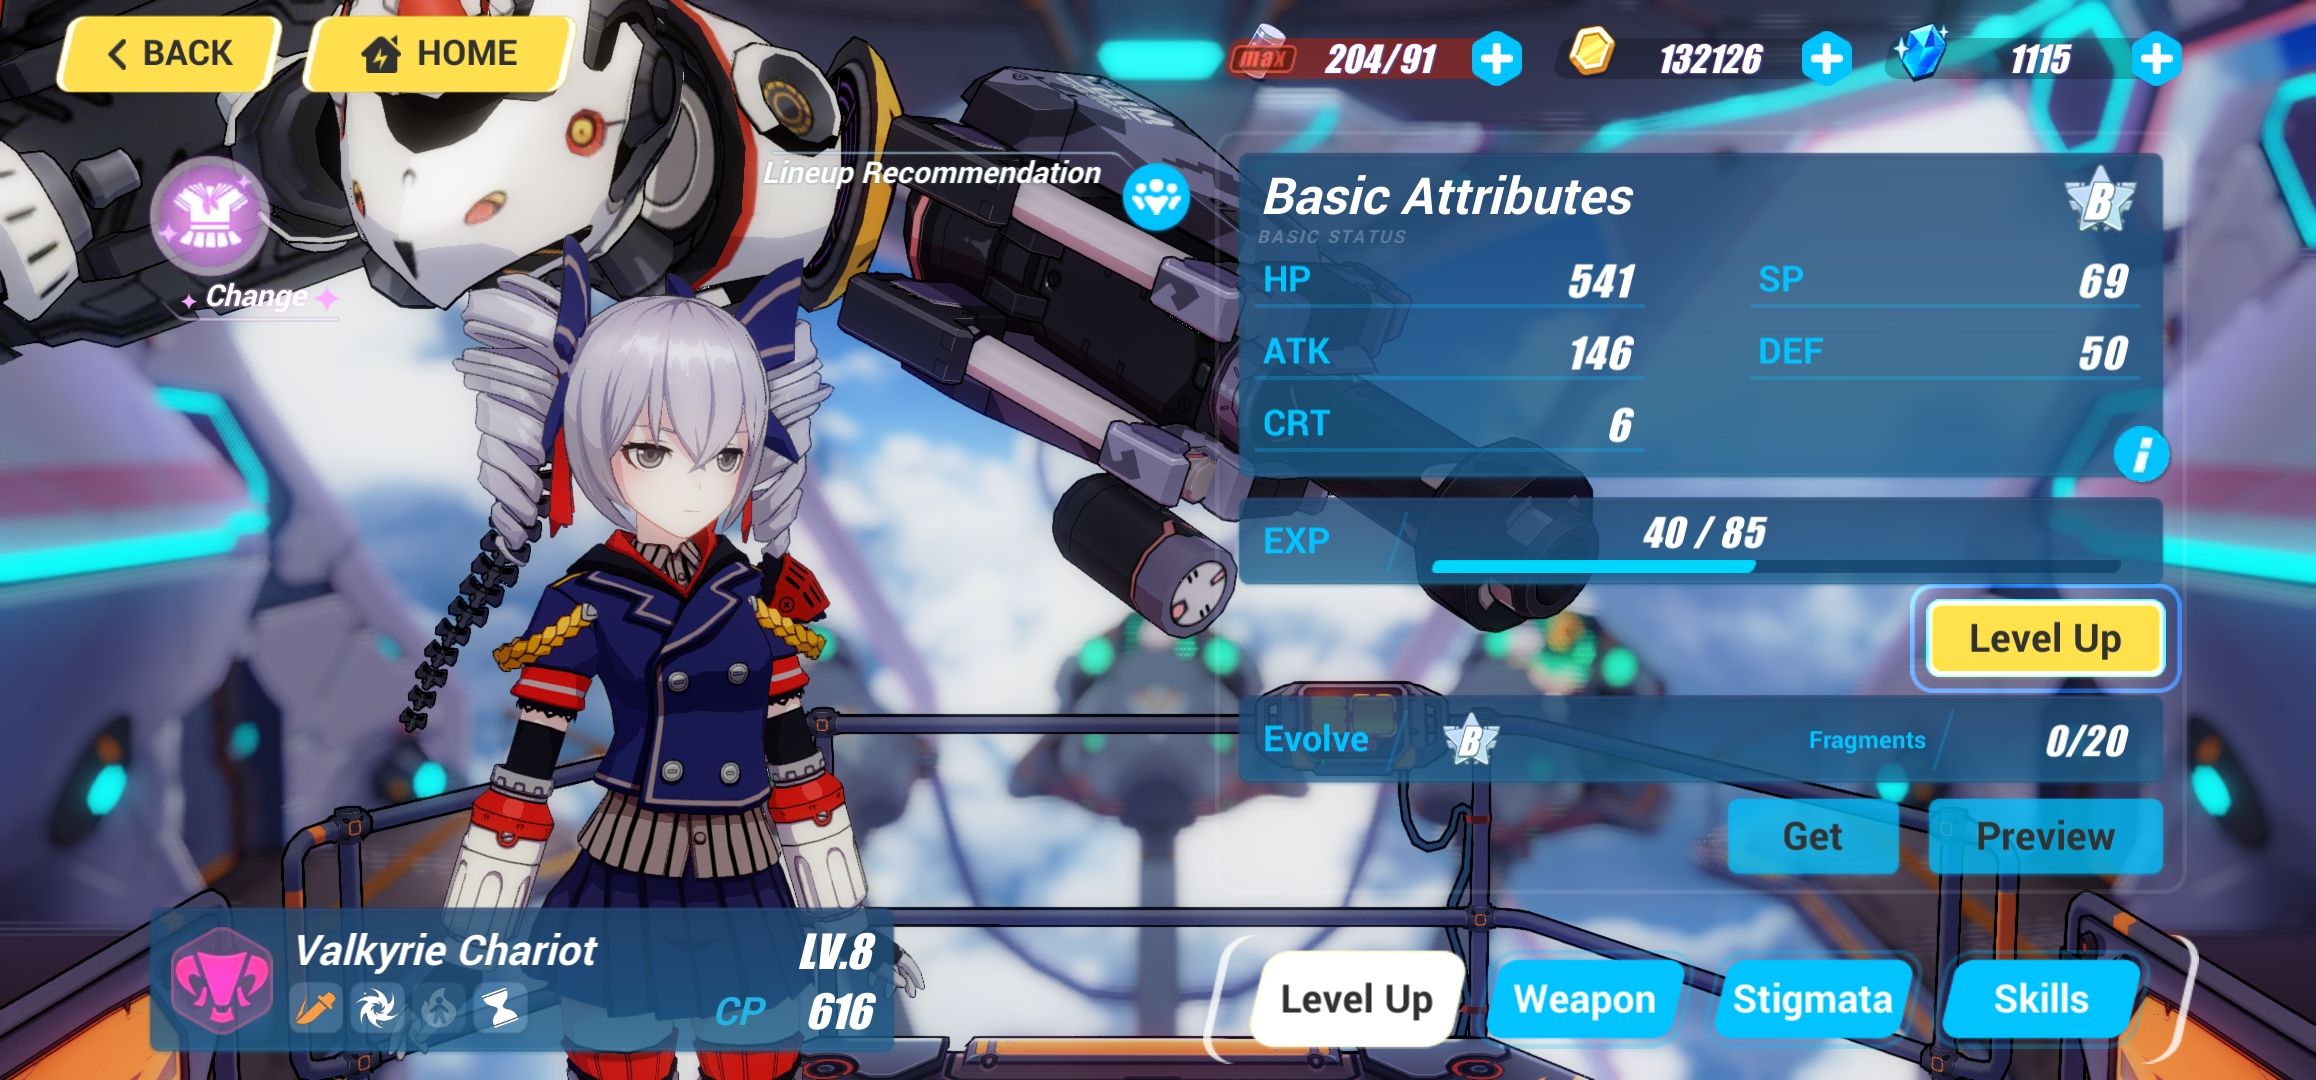 Valkyrie Chariot level up guide Bronya